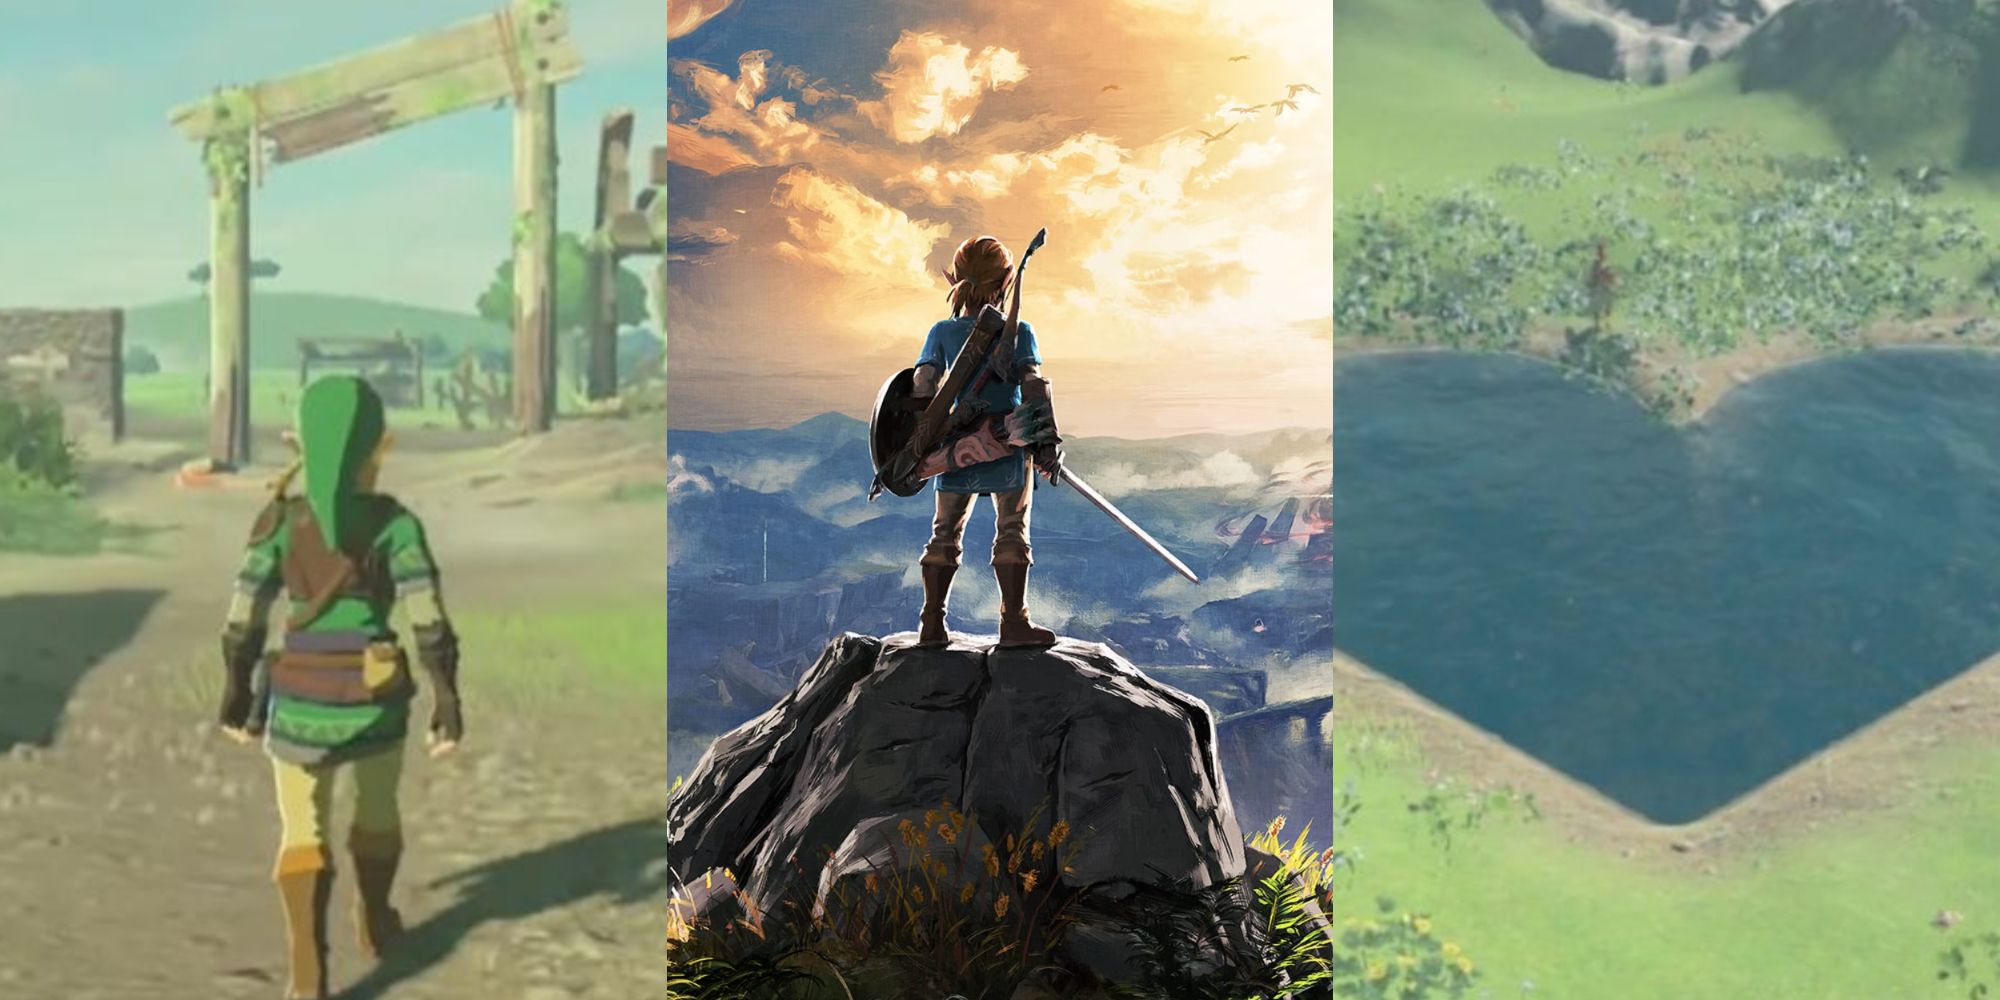 Hard to find locations in Breath of the Wild